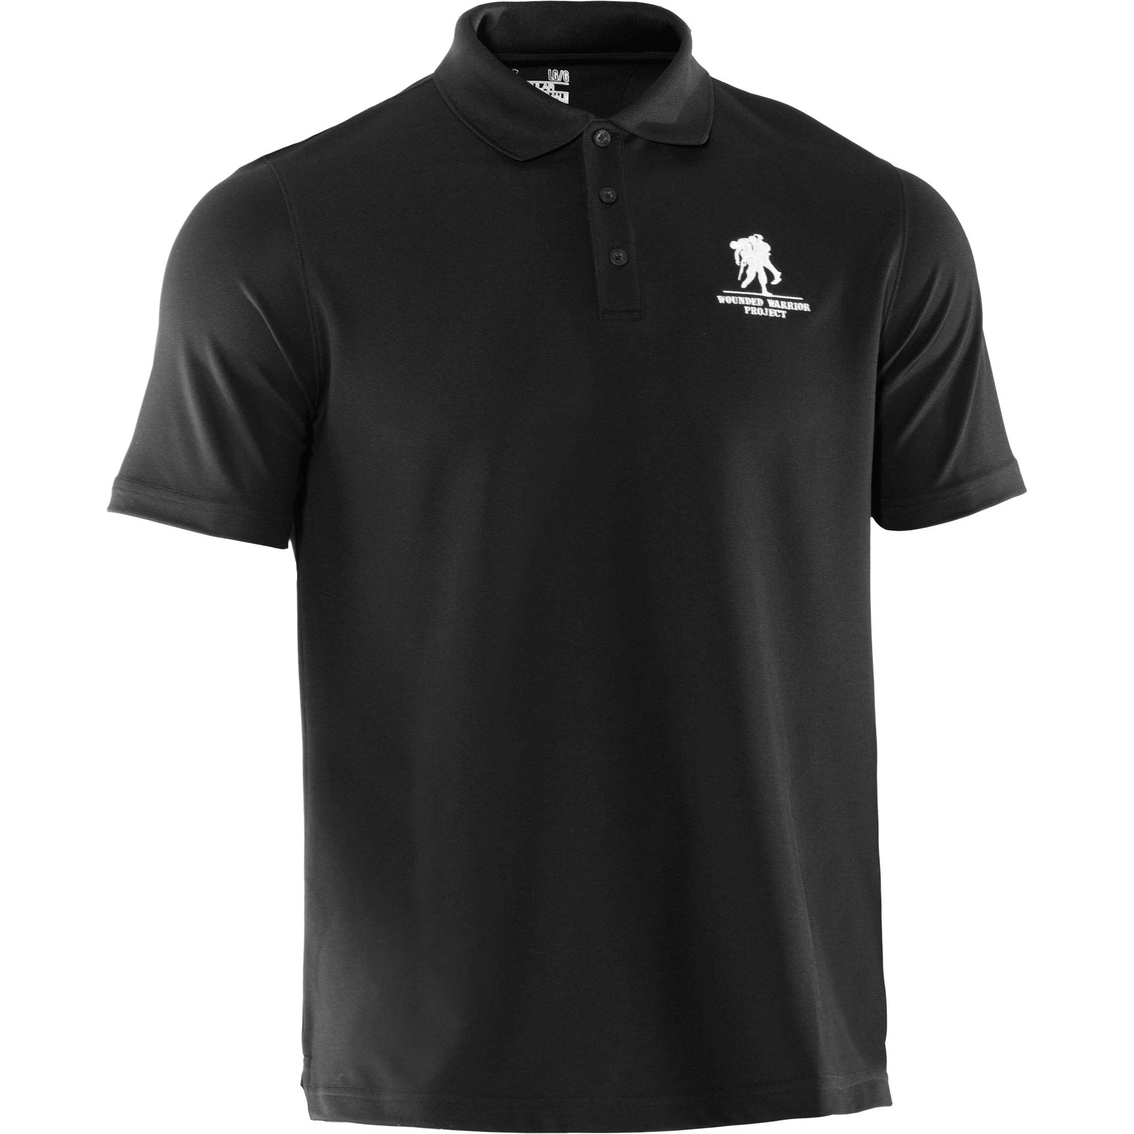 wounded warrior polo shirts